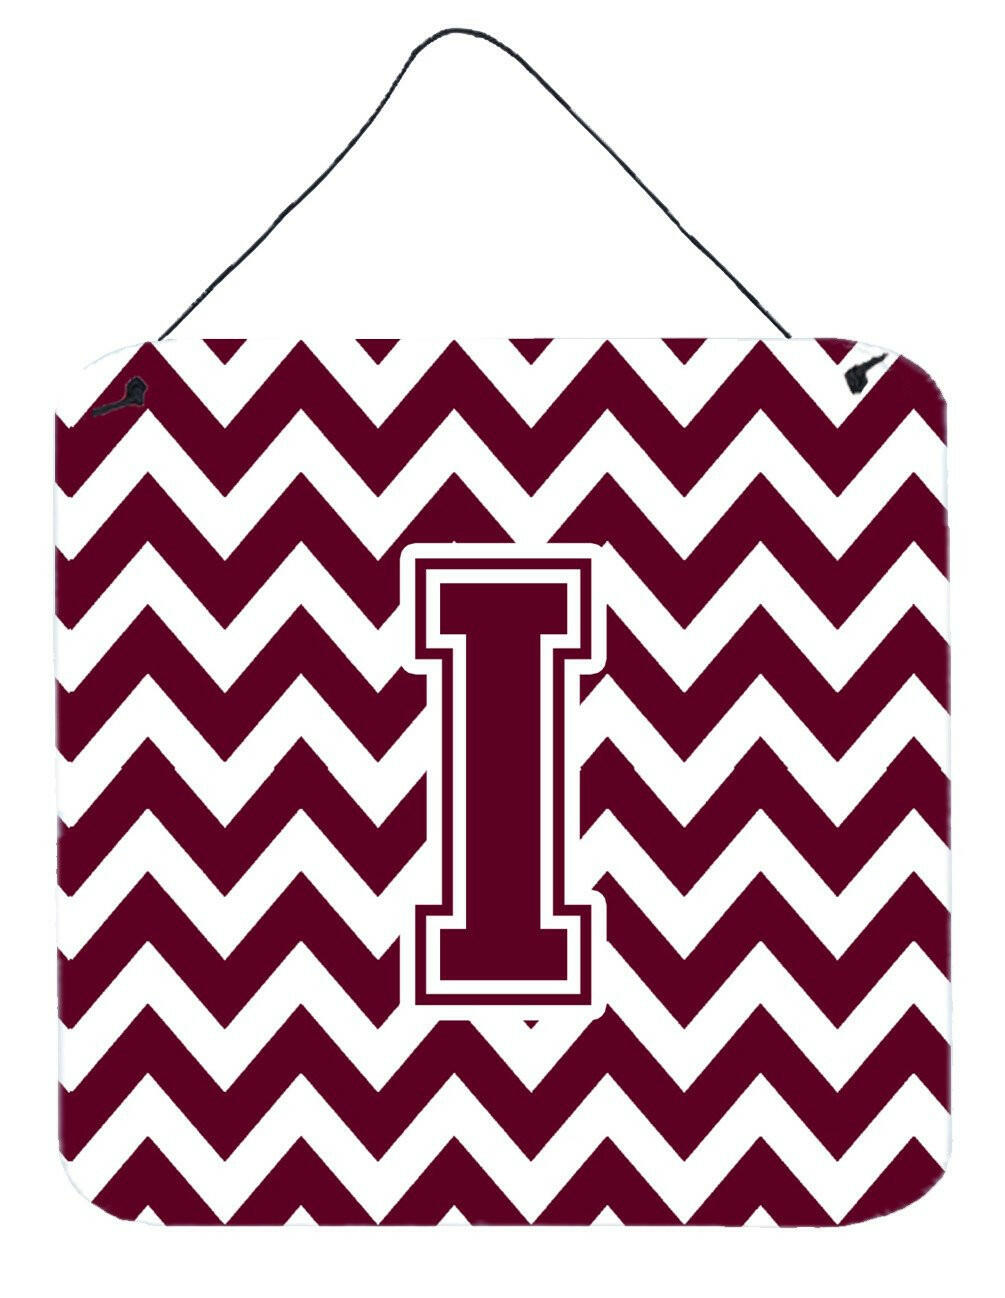 Letter I Chevron Maroon and White  Wall or Door Hanging Prints CJ1051-IDS66 by Caroline's Treasures